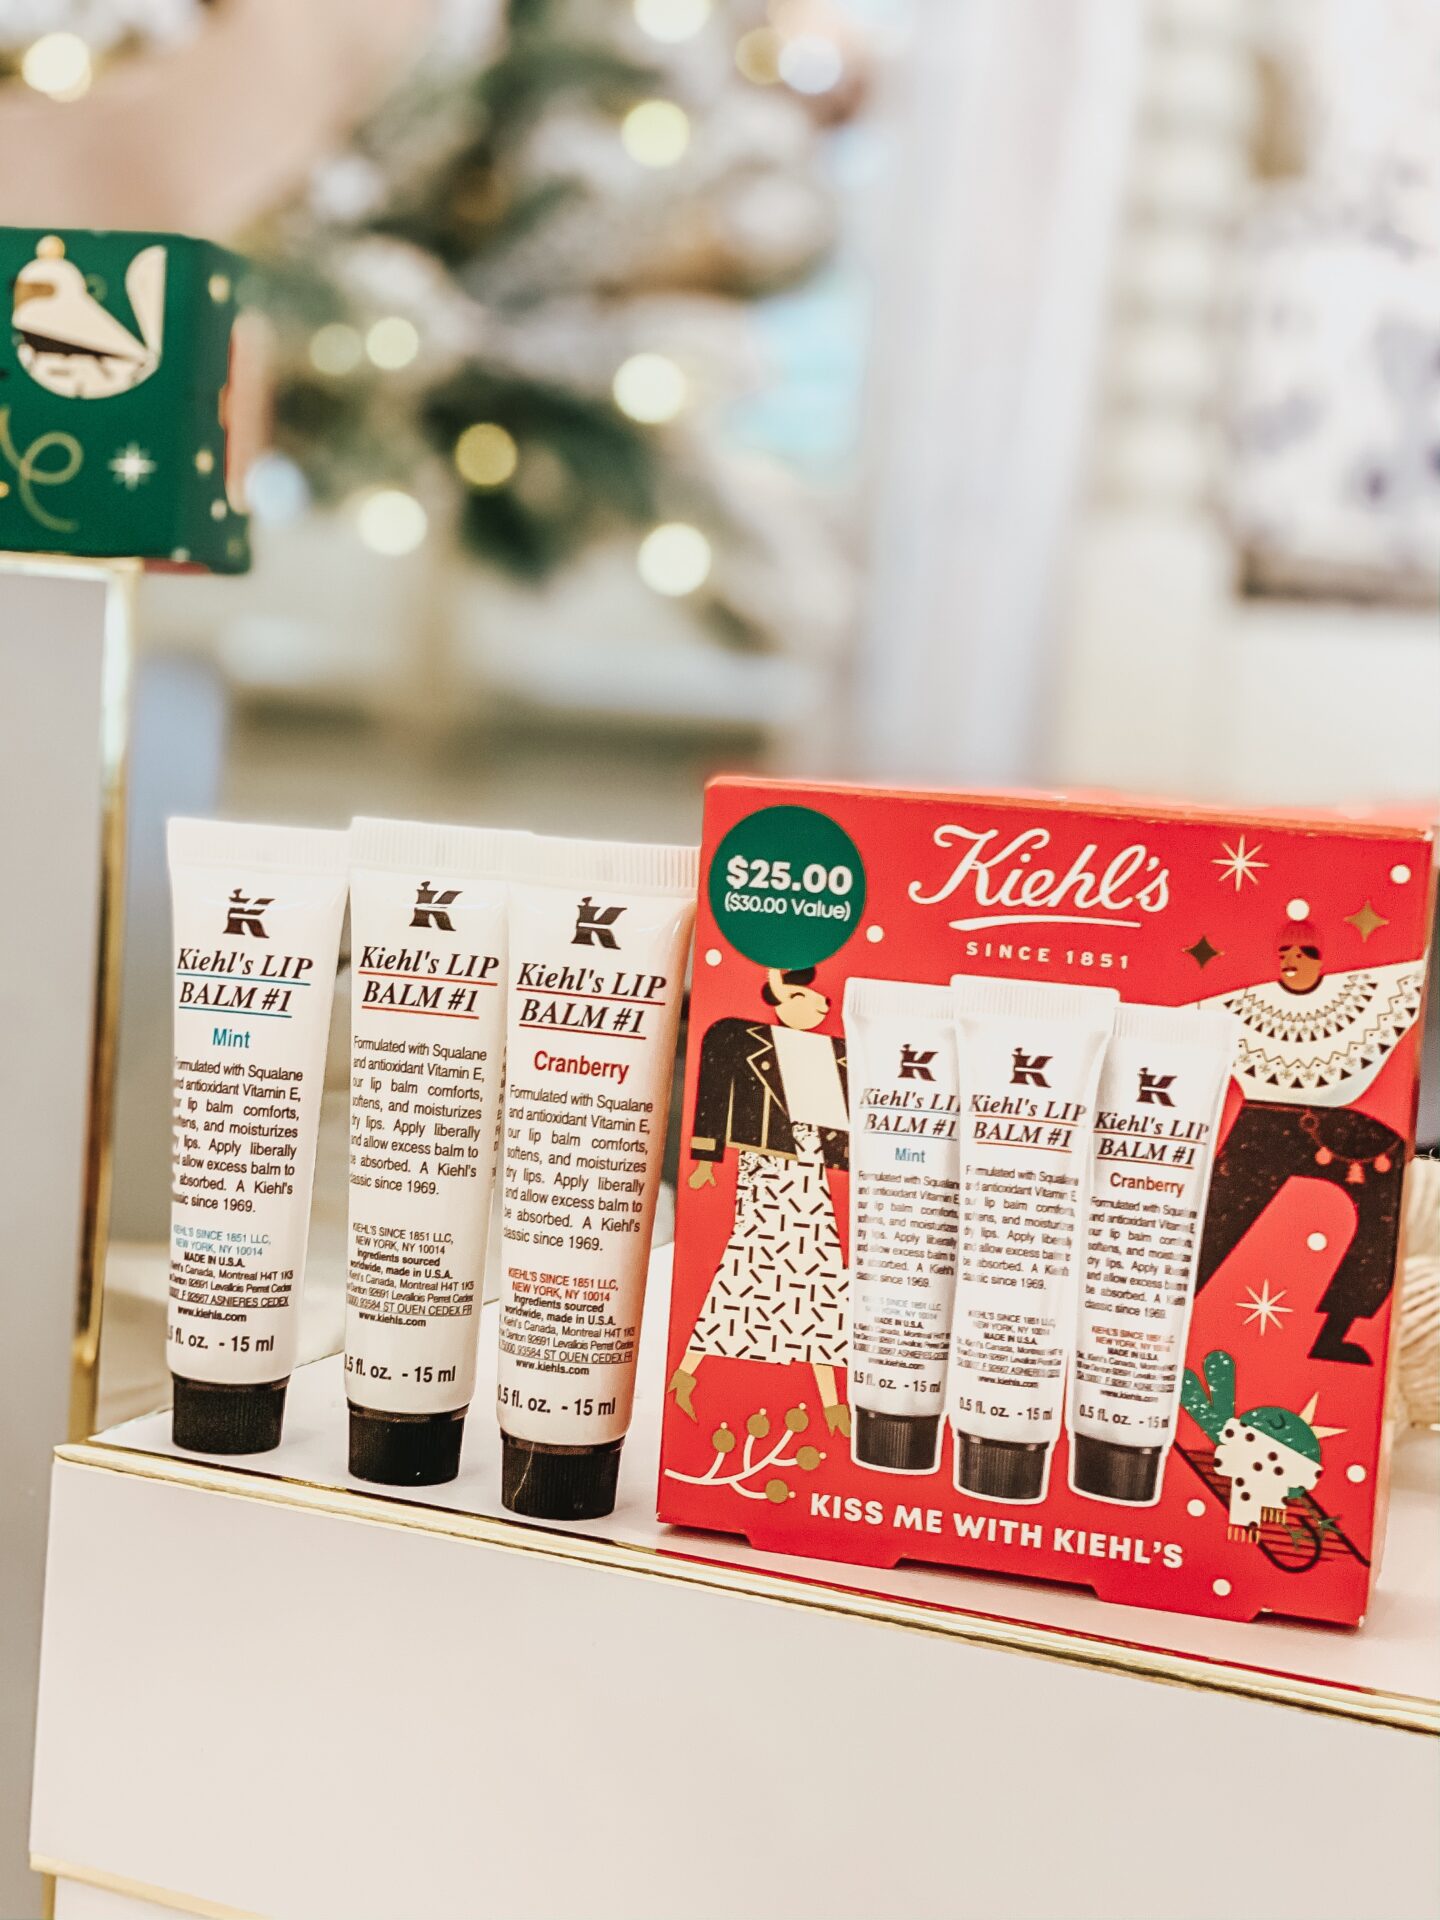 Kiehl's Holiday Gift Sets at Nordstrom